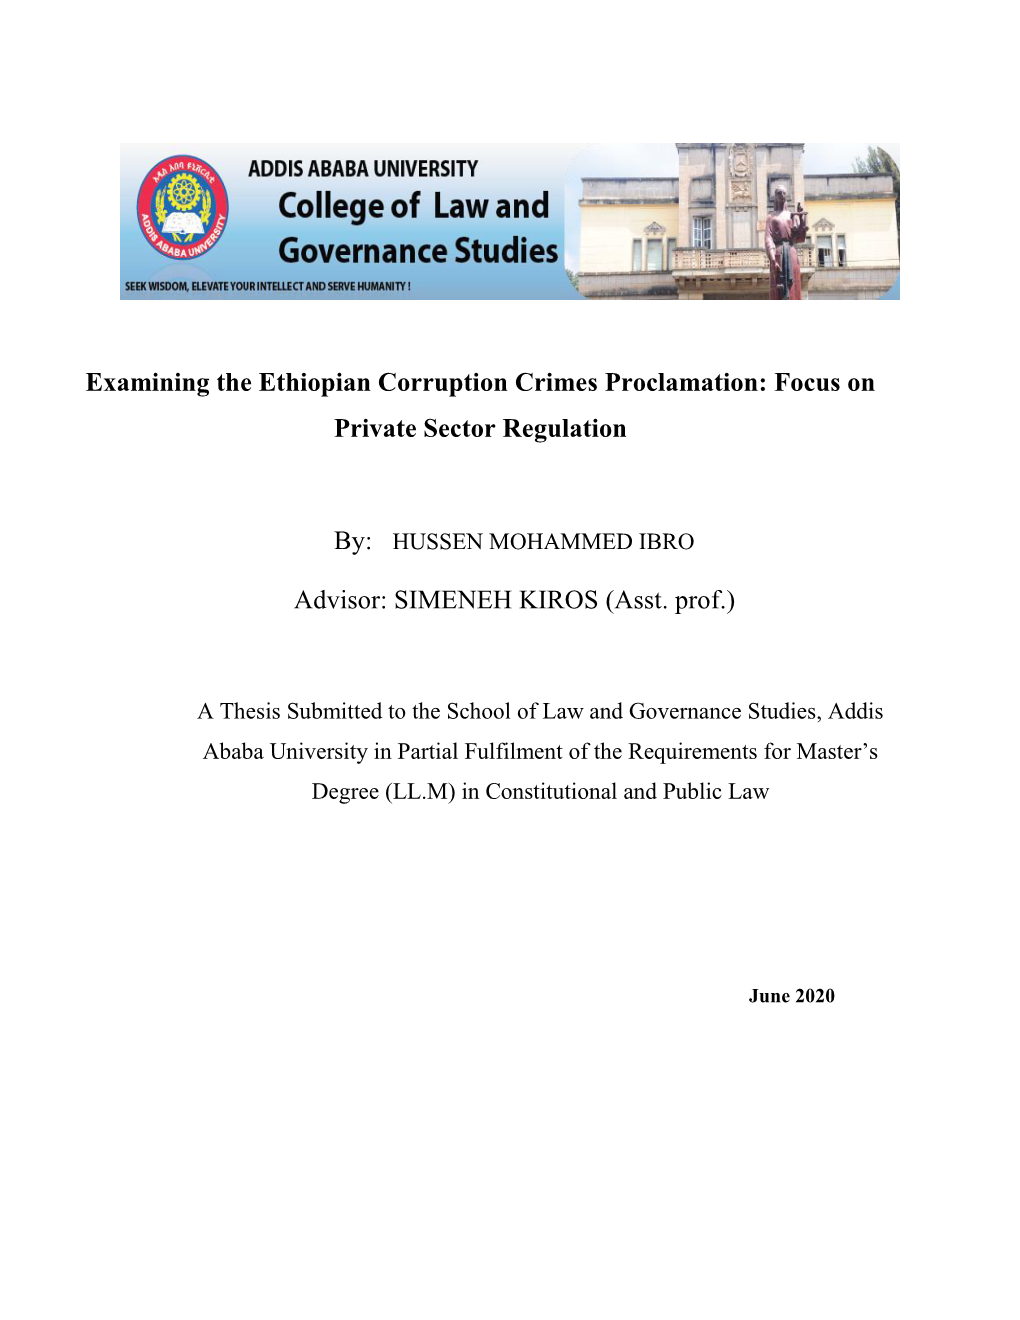 Examining the Ethiopian Corruption Crimes Proclamation: Focus on Private Sector Regulation